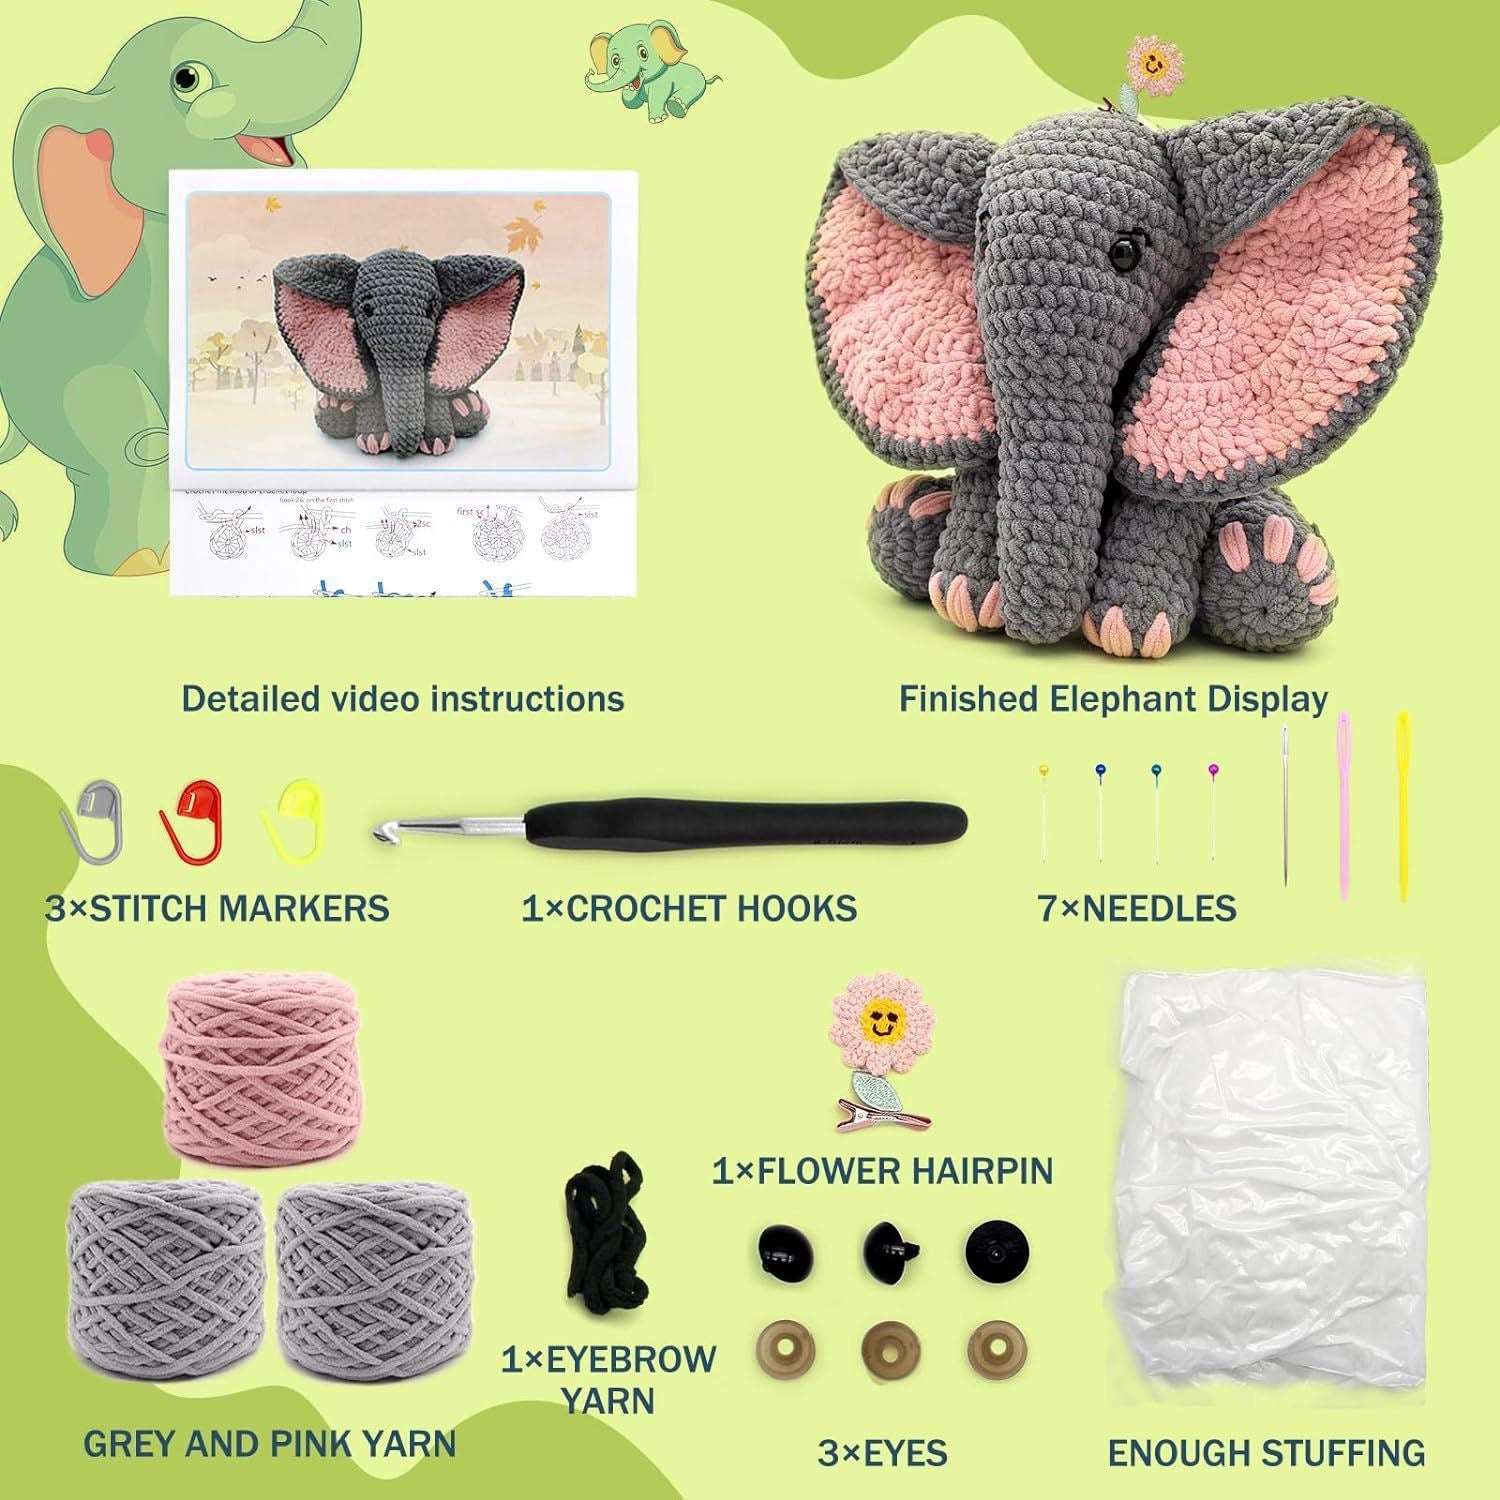 Crochet Kit for Beginners,13in Crochet Animal Kit Elephant,Crochet Starter Kit Gift for Adults Kids with Yarn Sets,Amigurumi Crochet Kits with Step-by-Step Video Tutorials.